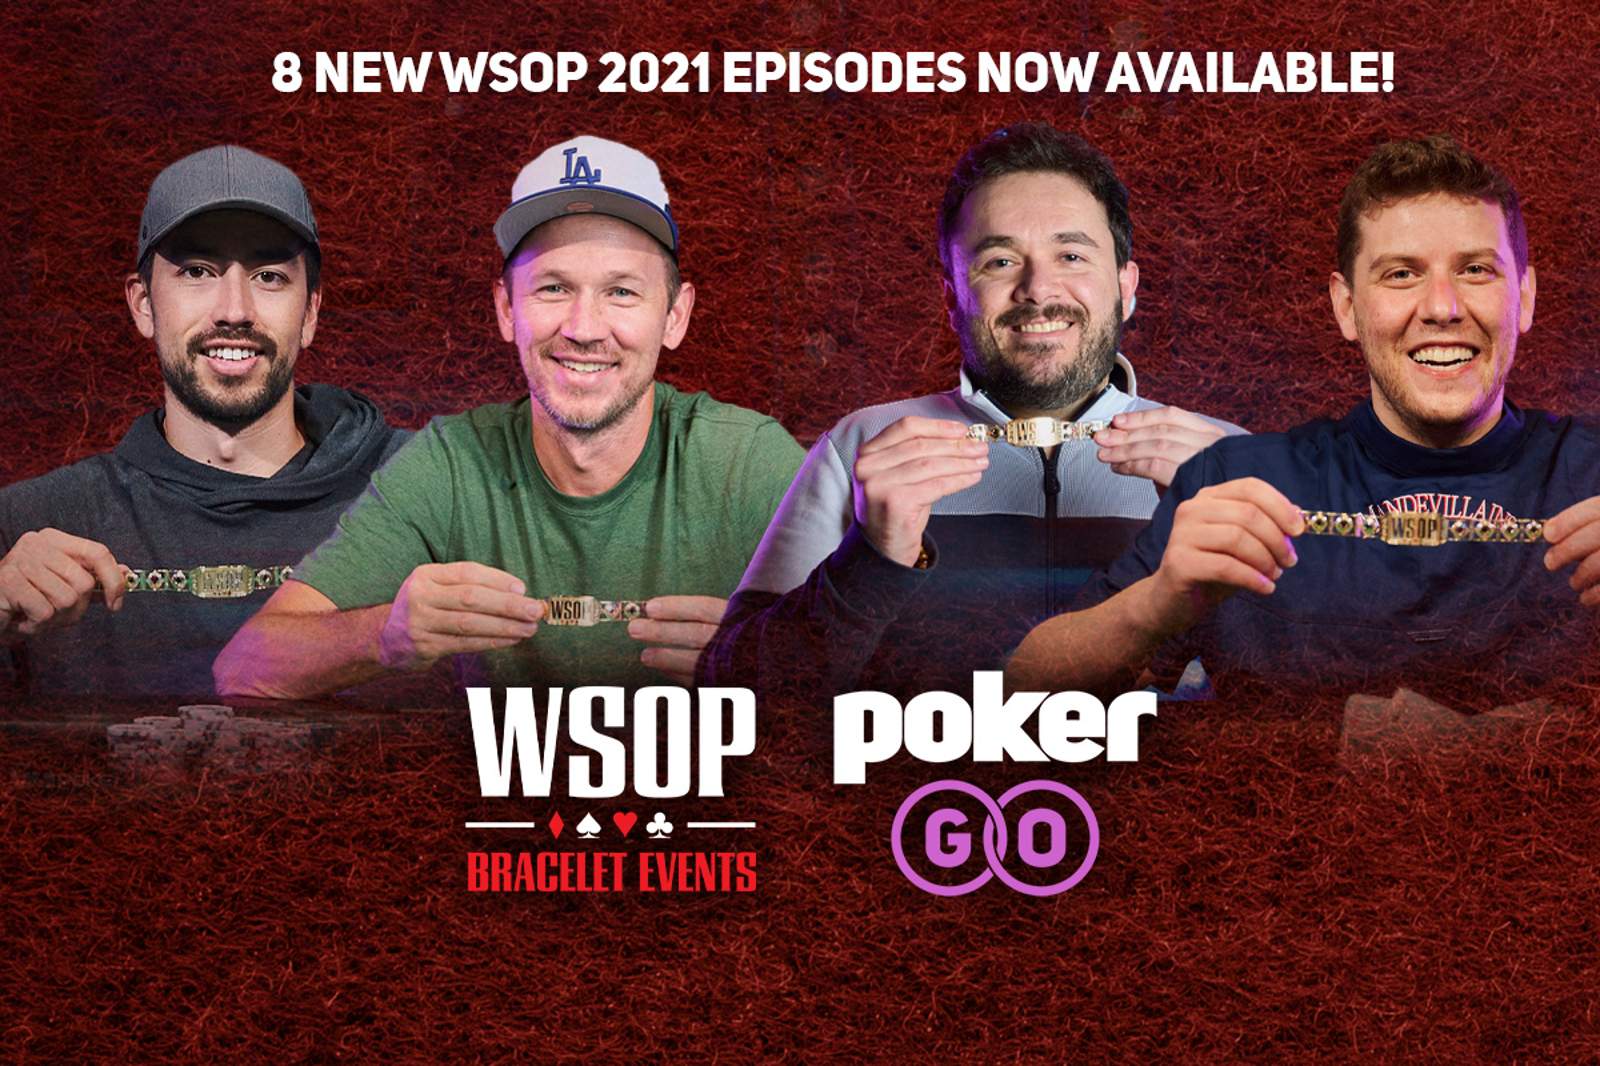 Episodes 1-8 Now Available from 2021 WSOP Bracelet Events